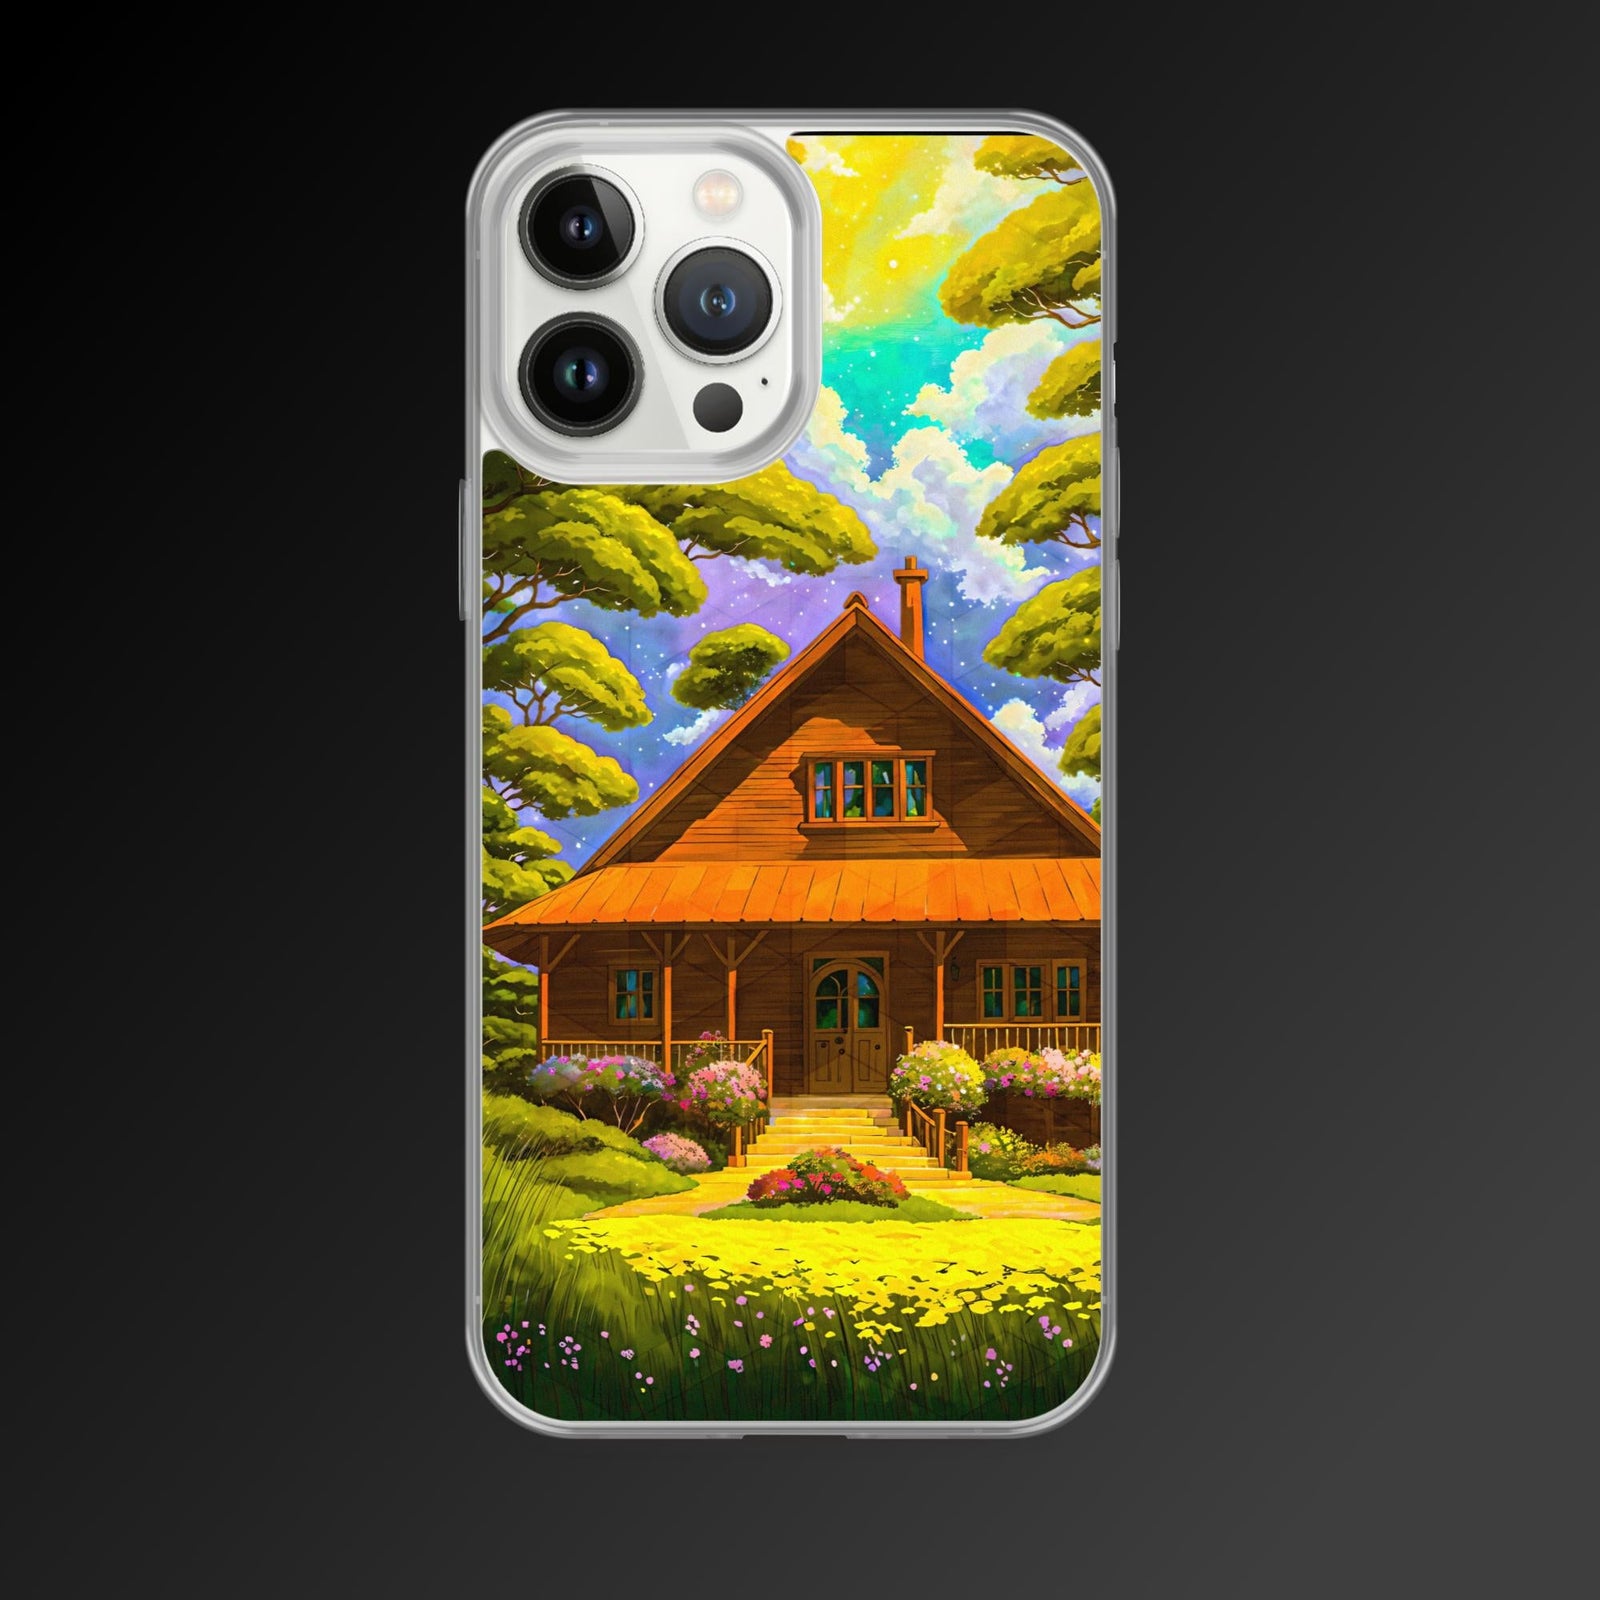 "Sleepy grove" clear iphone case - Clear iphone case - Ever colorful